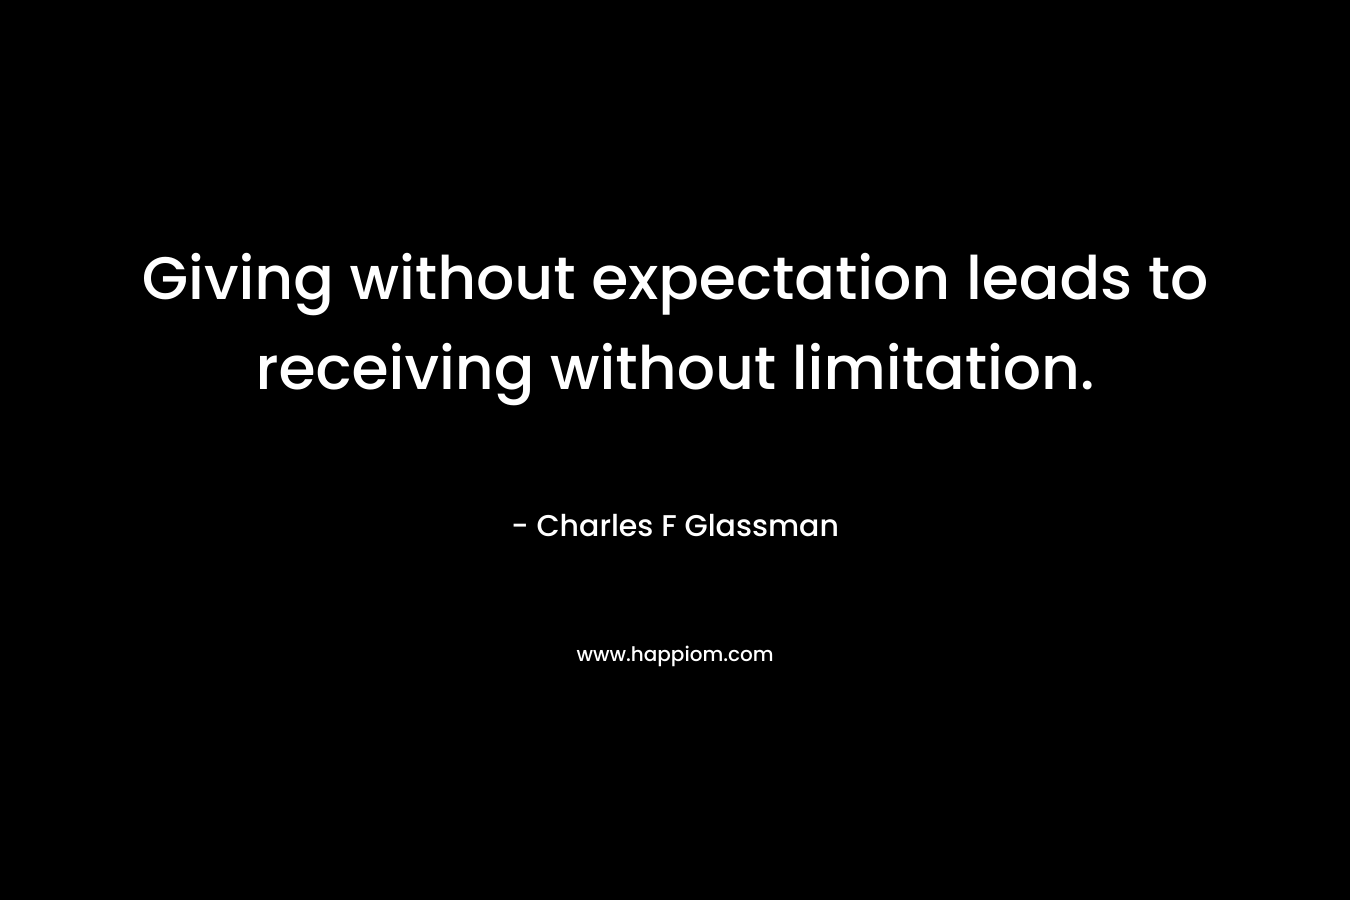 Giving without expectation leads to receiving without limitation.